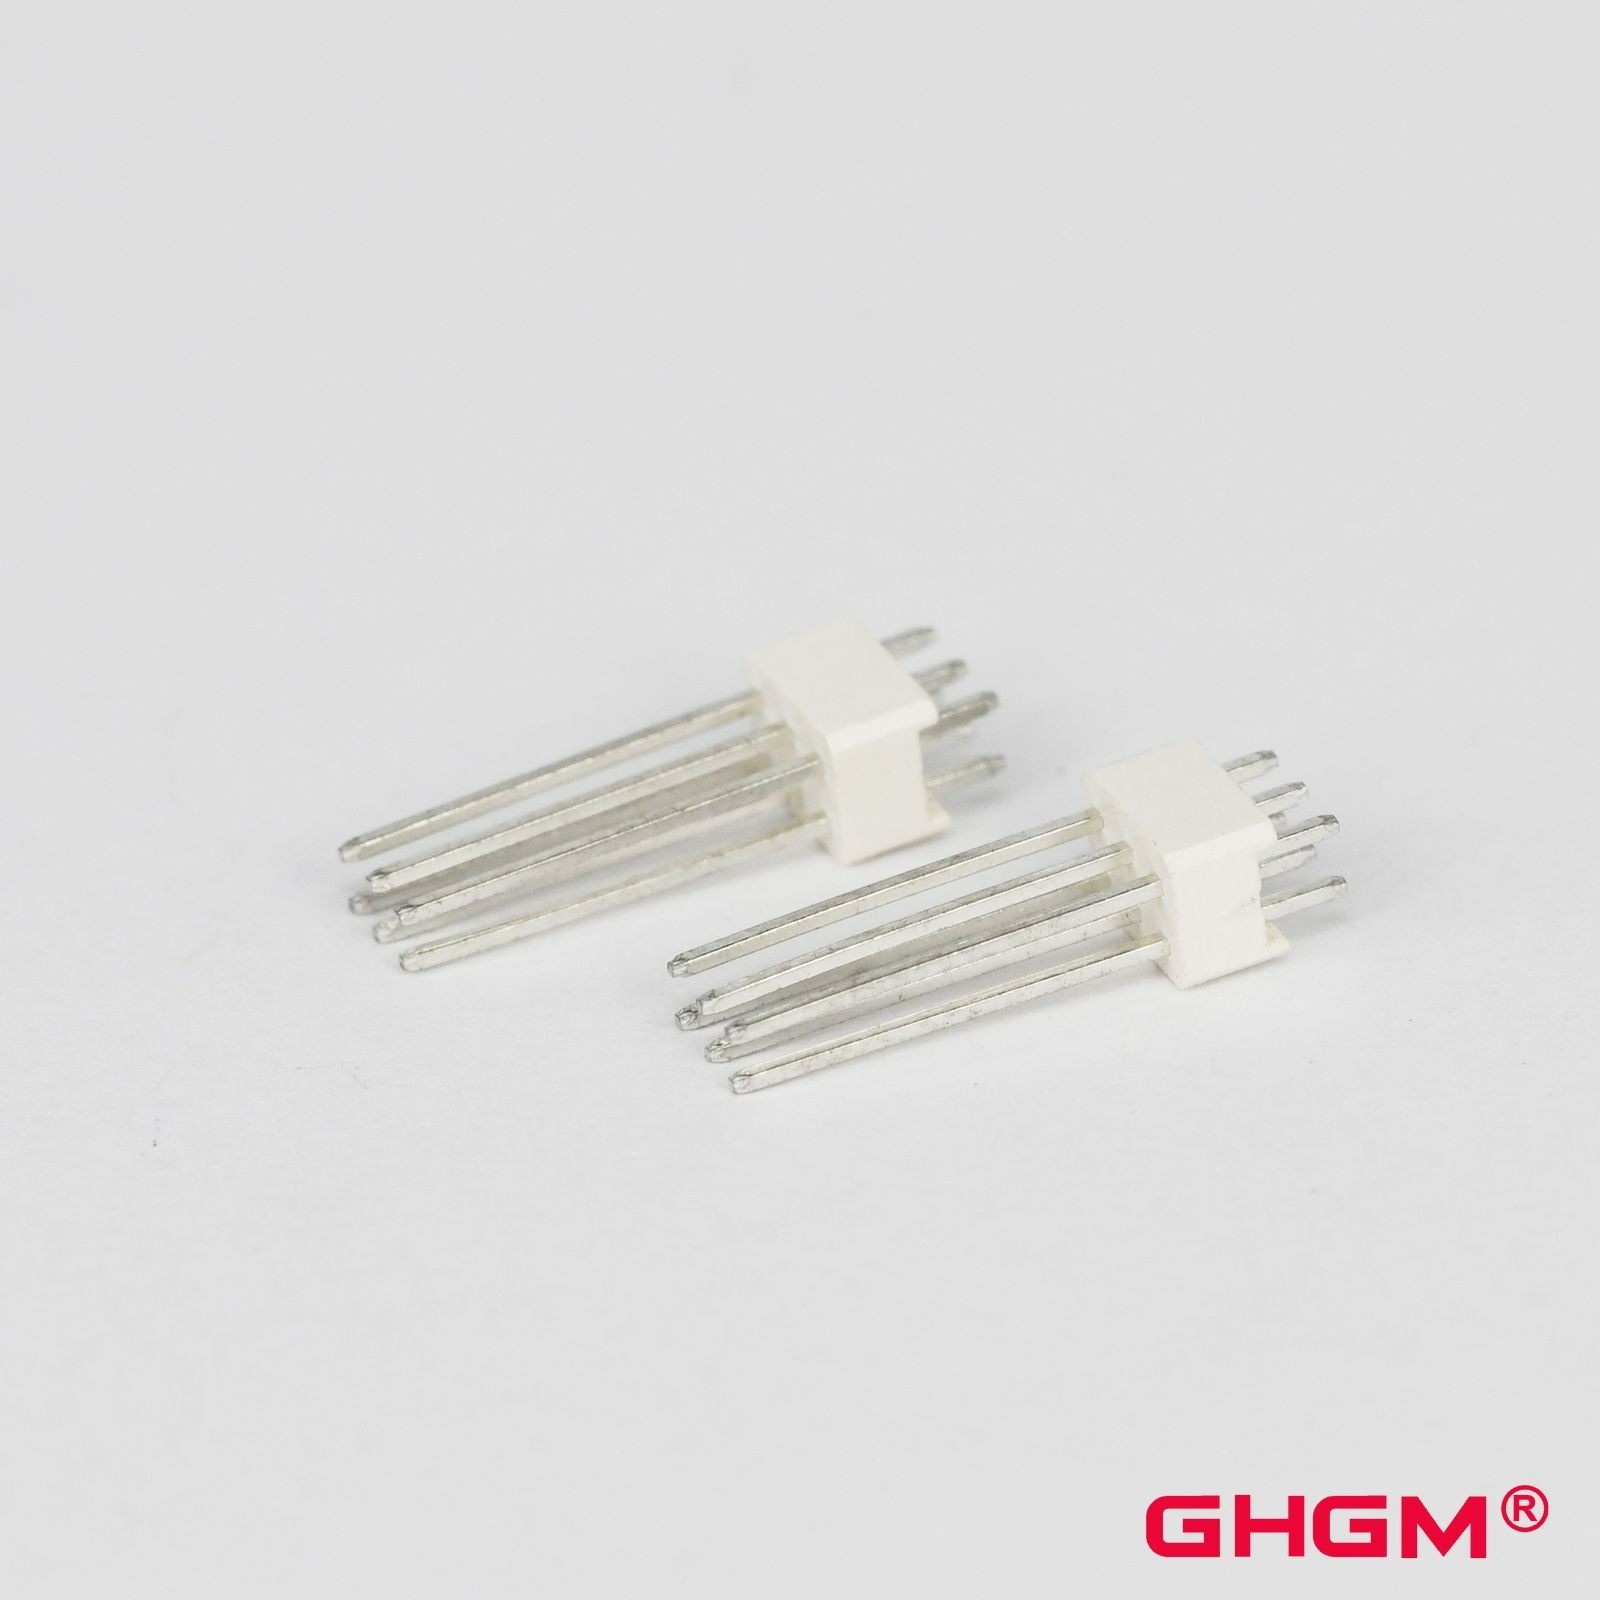 G15 M0051 Pitch 1.5mm Straight Needle Male connector, Intelligent Light Connector, smart light connector, male connector